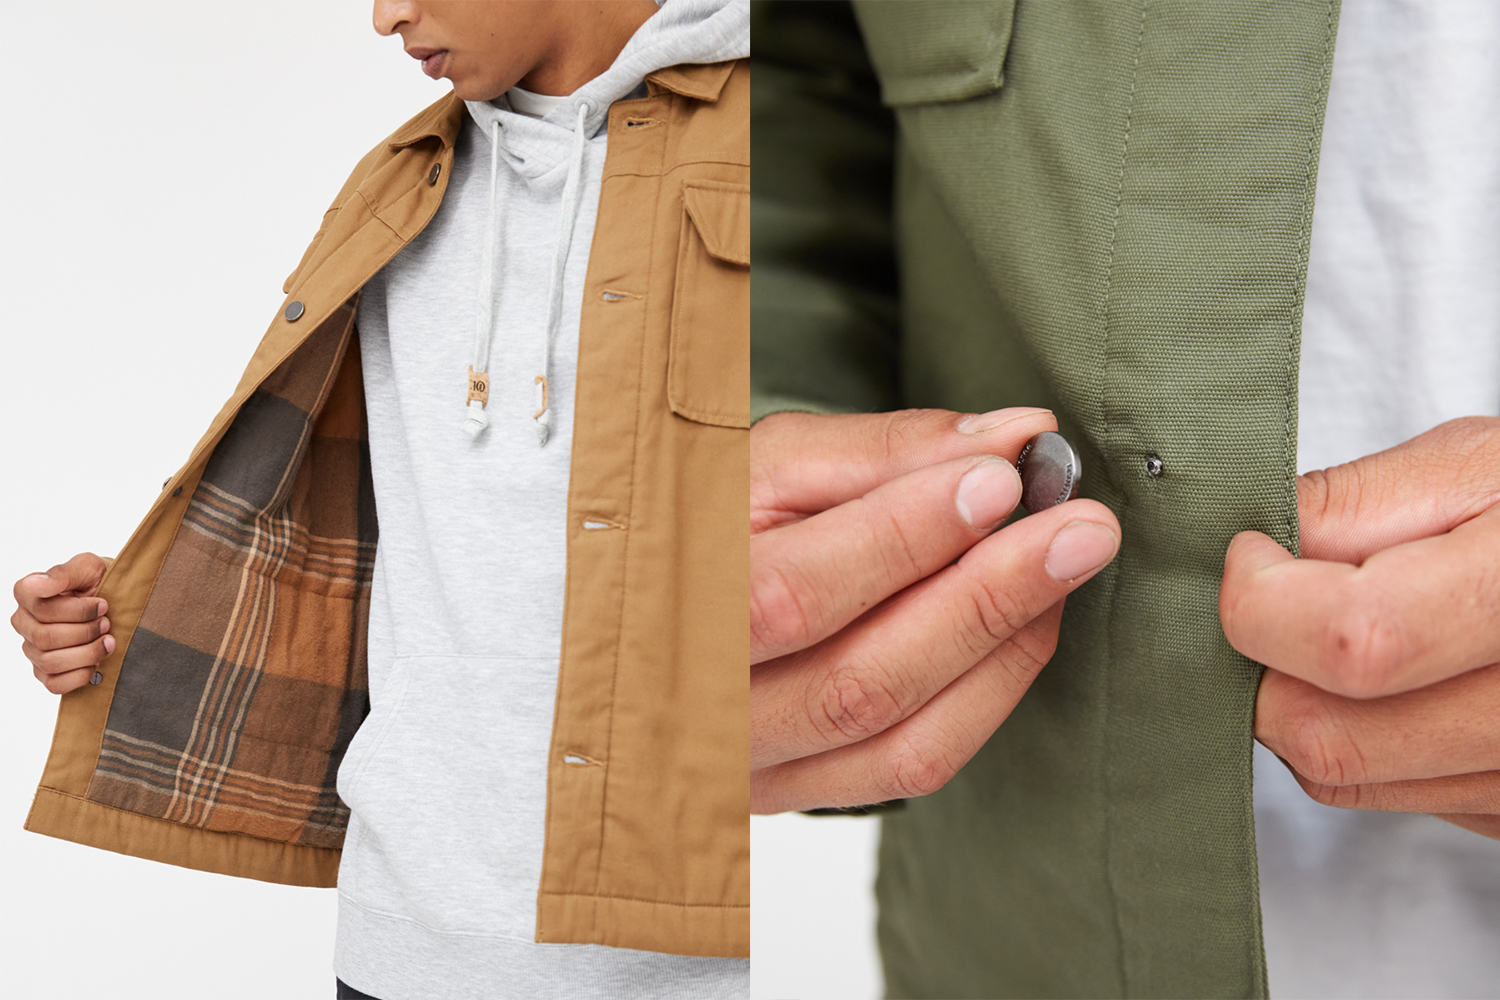 The details of the Tentree jacket, the left image in brown showing the flannel lining and the right image showing the removable metal buttons in a green jacket